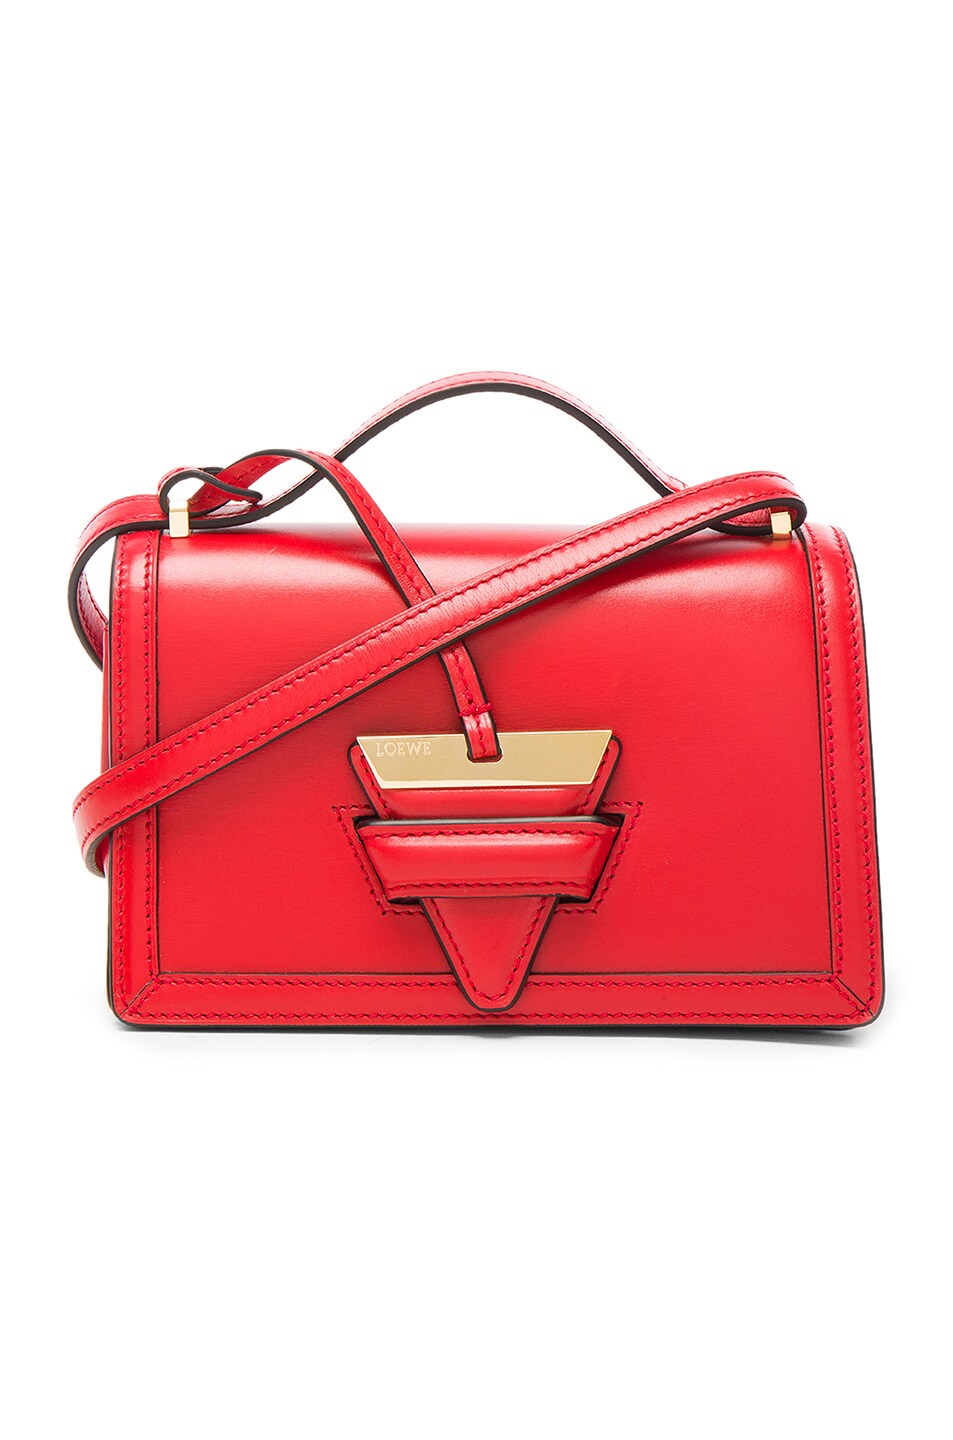 Image 1 of Loewe Small Barcelona Bag in Primary Red